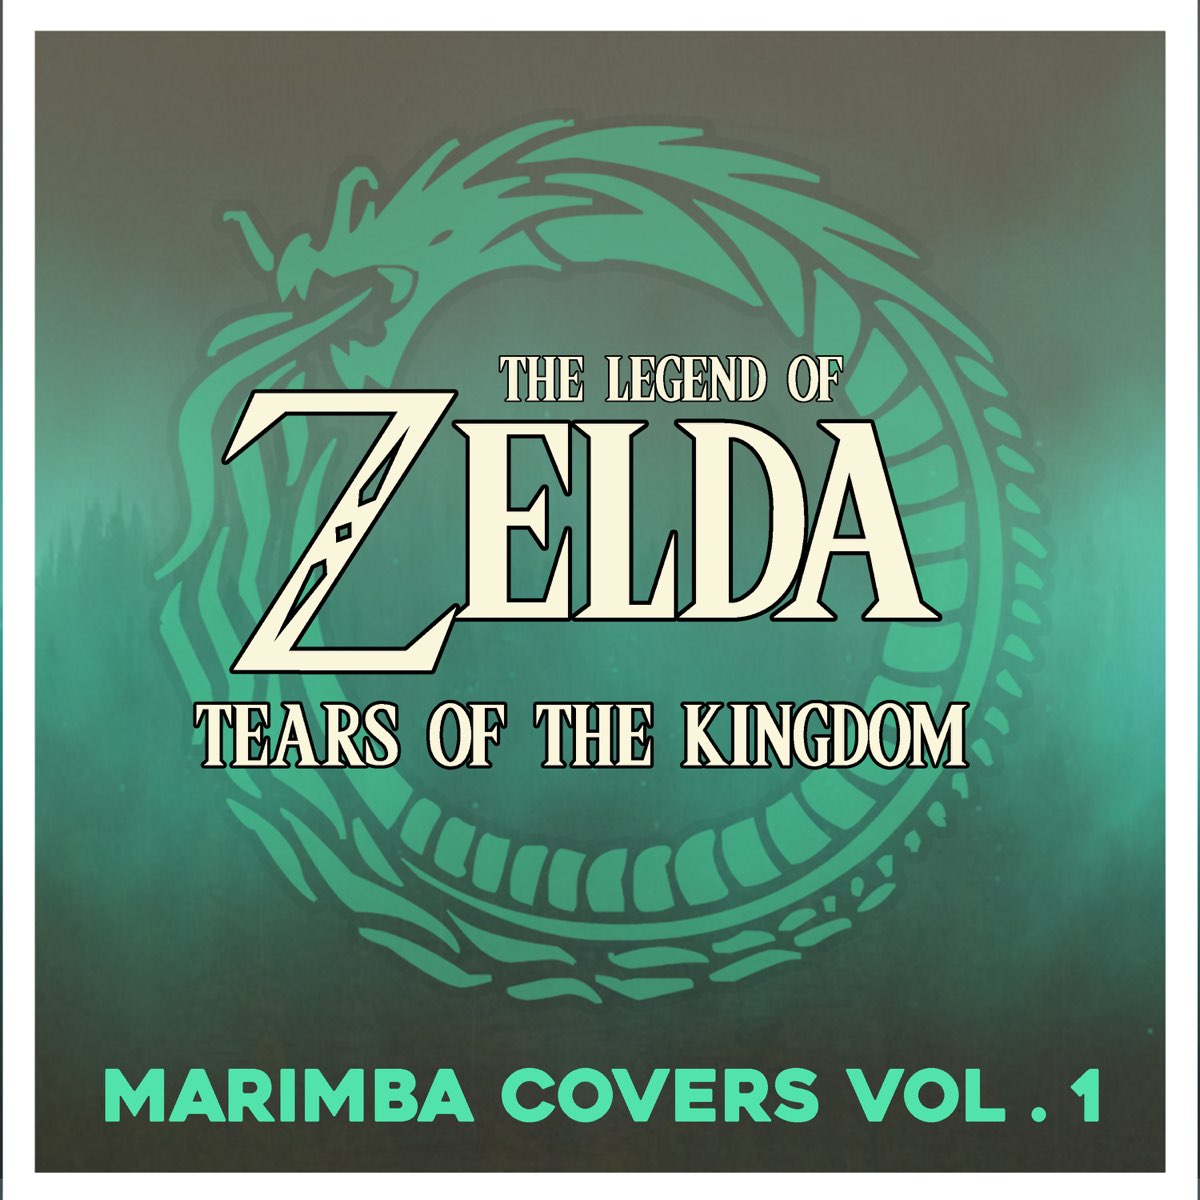 The Legend of Zelda: Tears of the Kingdom (Marimba Covers, Vol. 1)Select a country or regionSelect a country or region